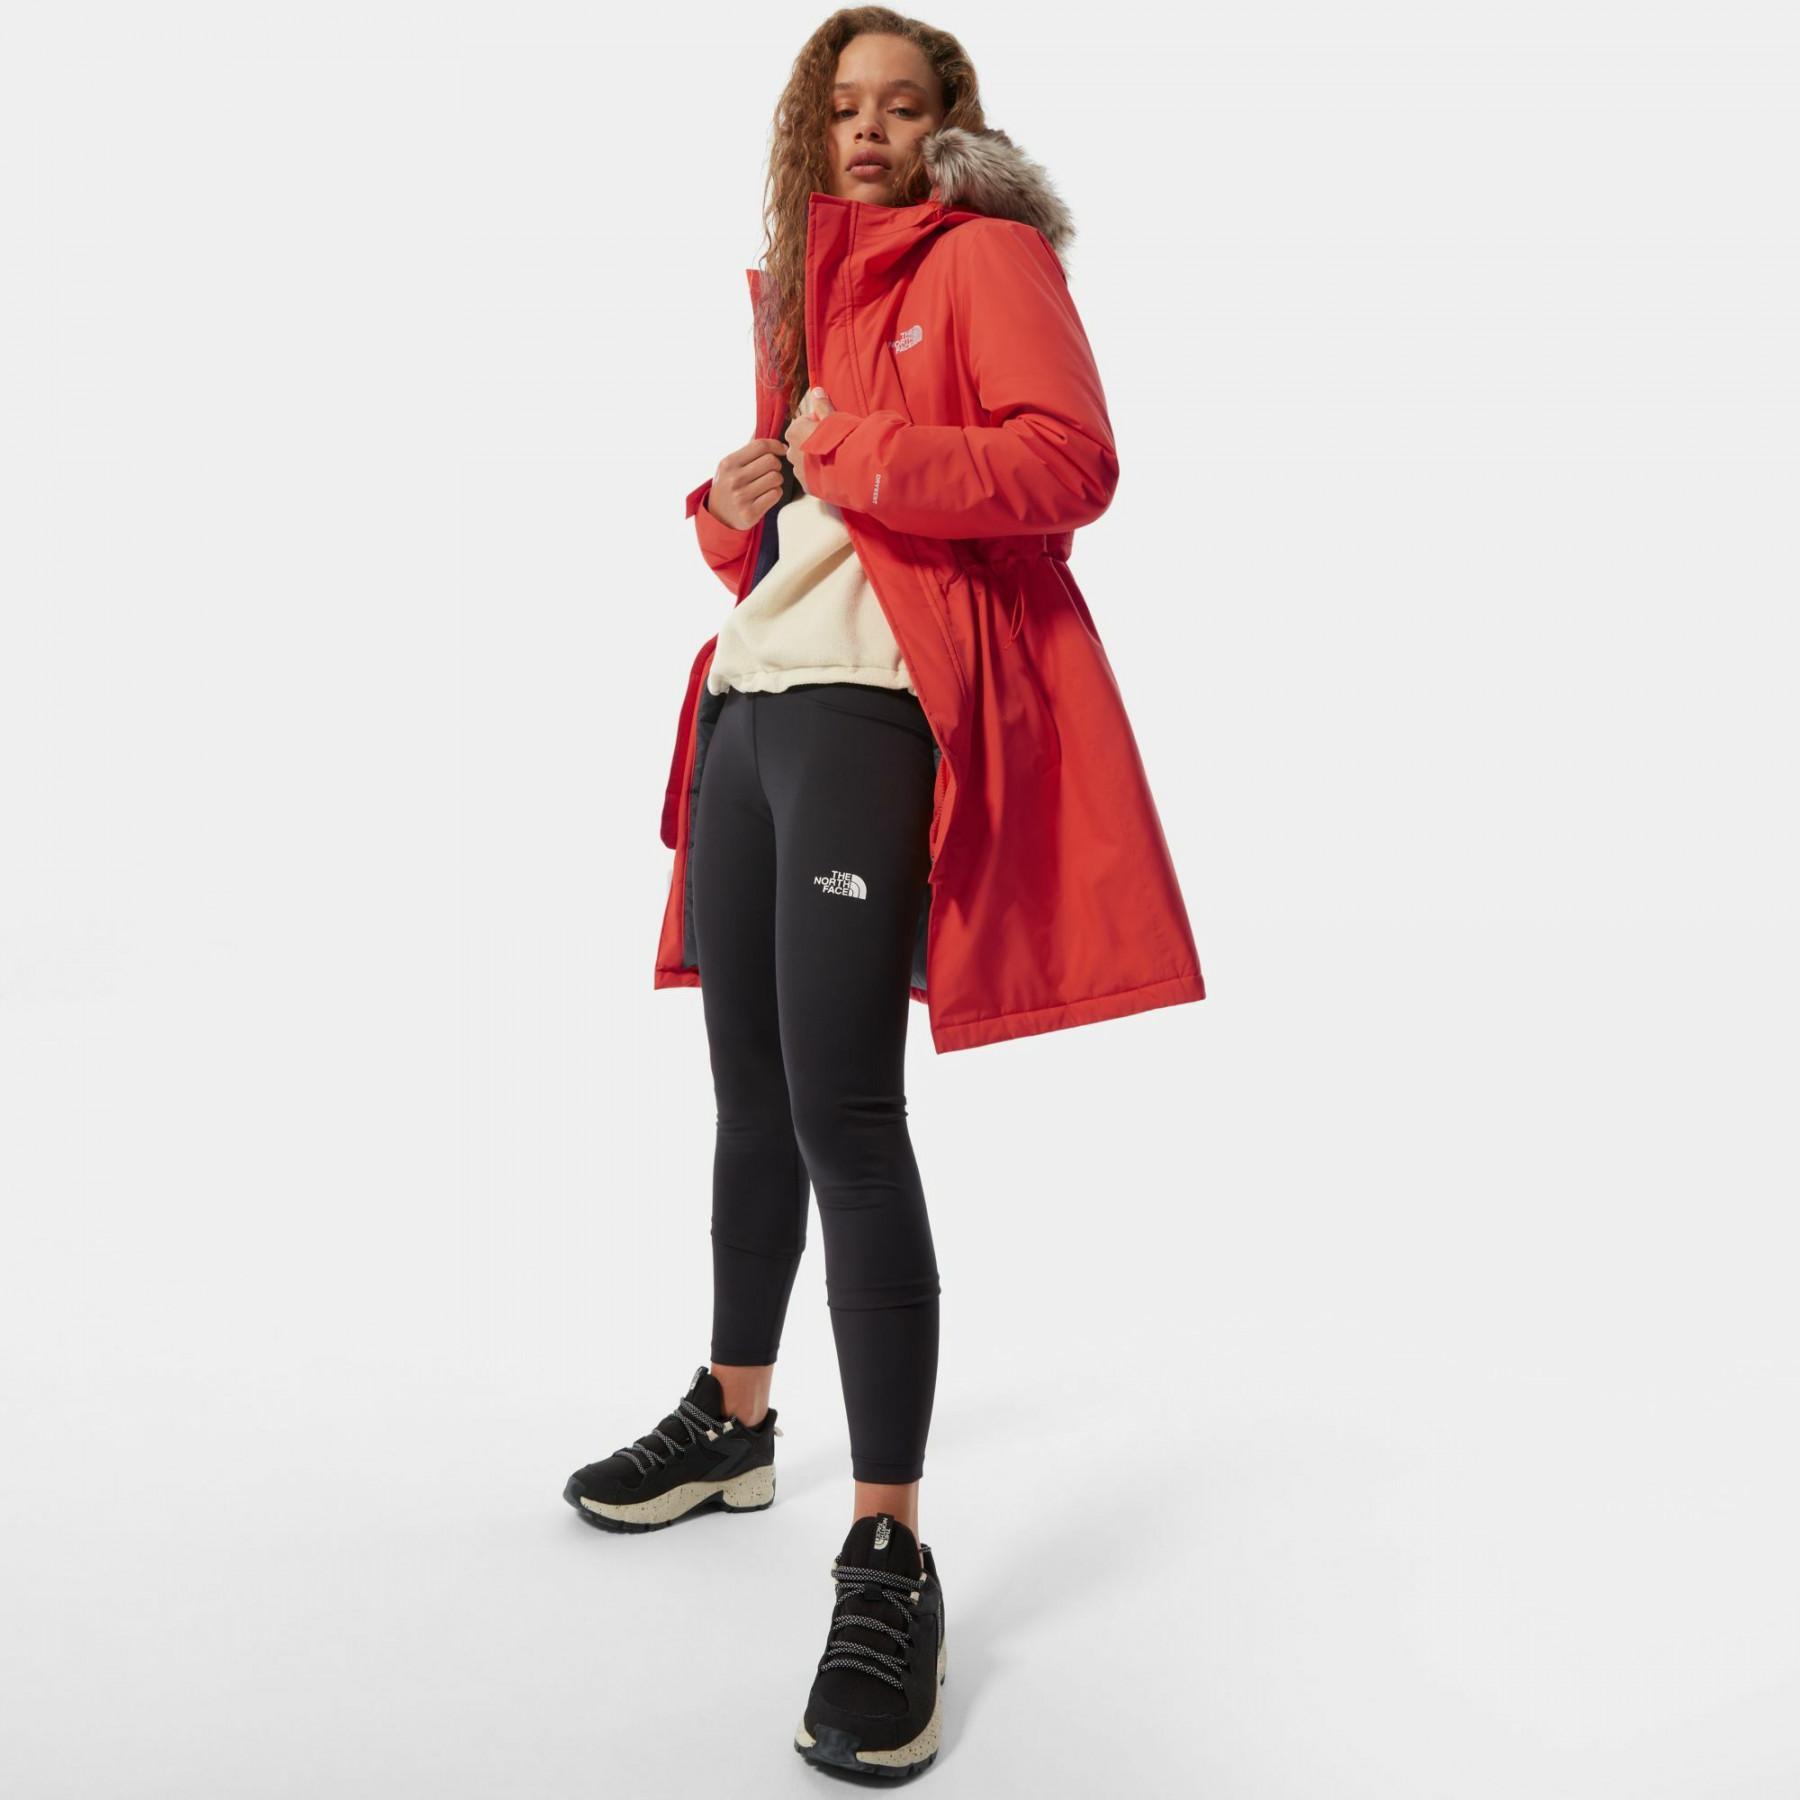 Women's parka The North Face Recycled Zaneck